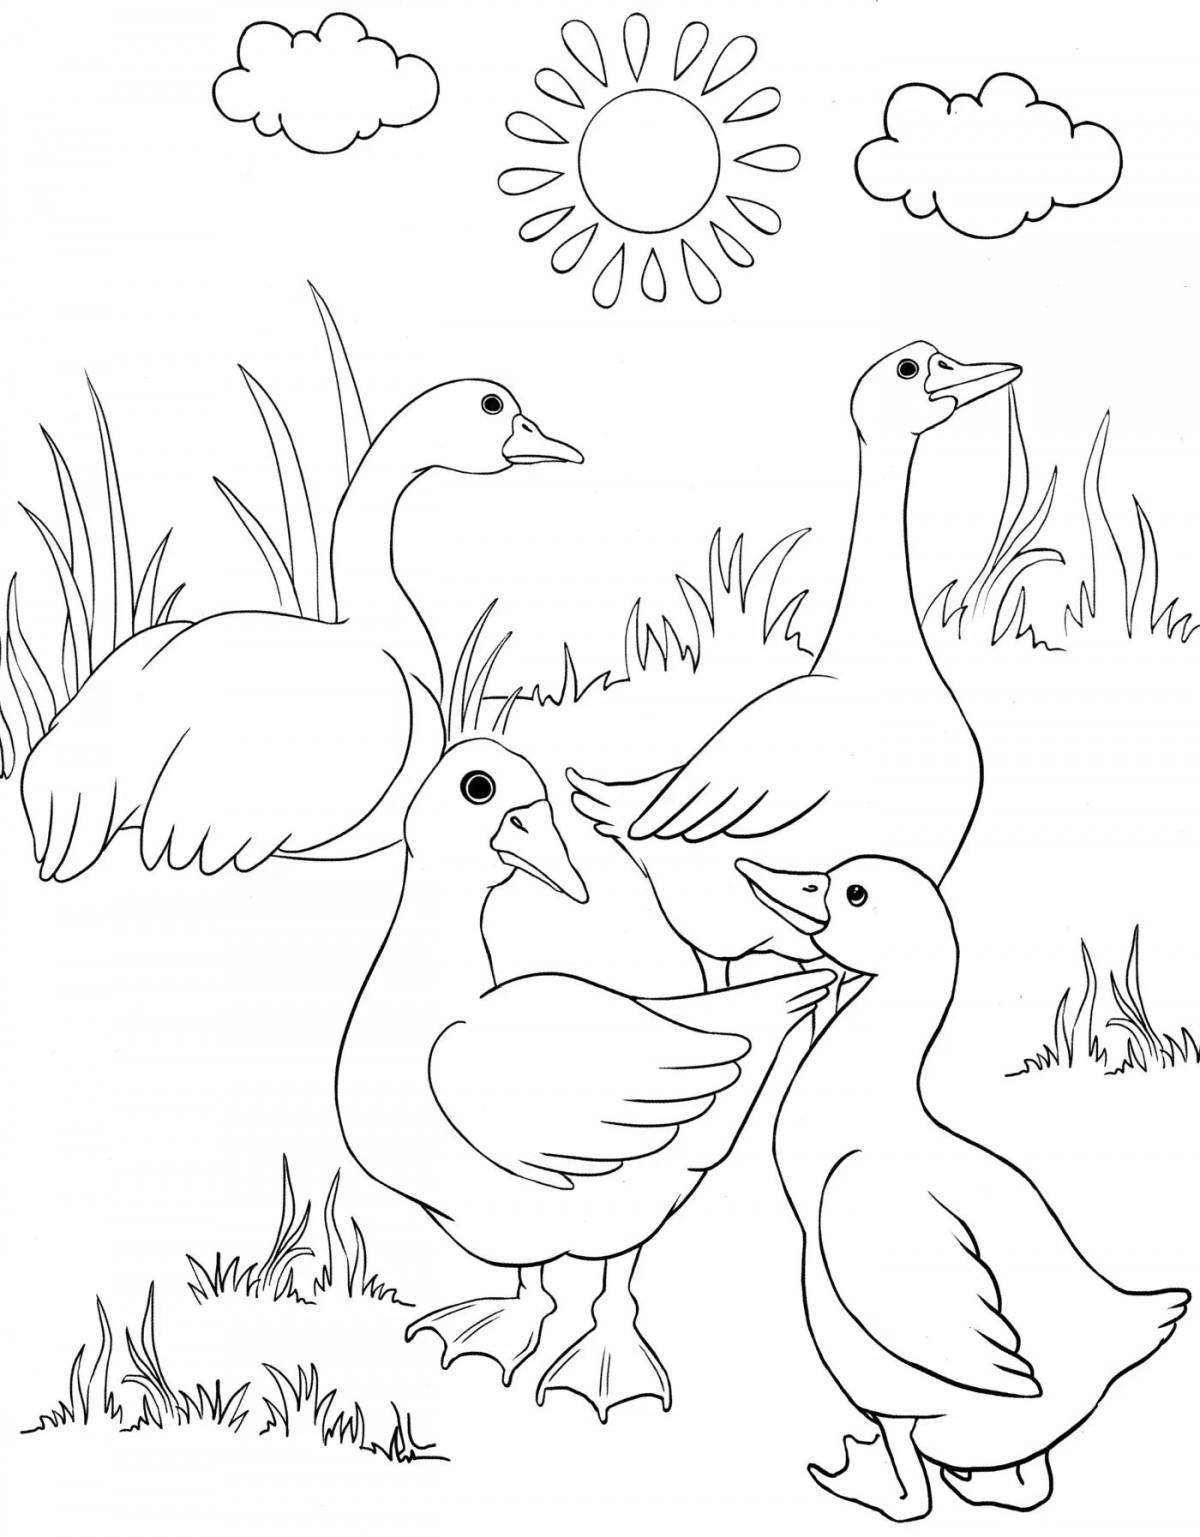 Awesome goose coloring page for 6-7 year olds